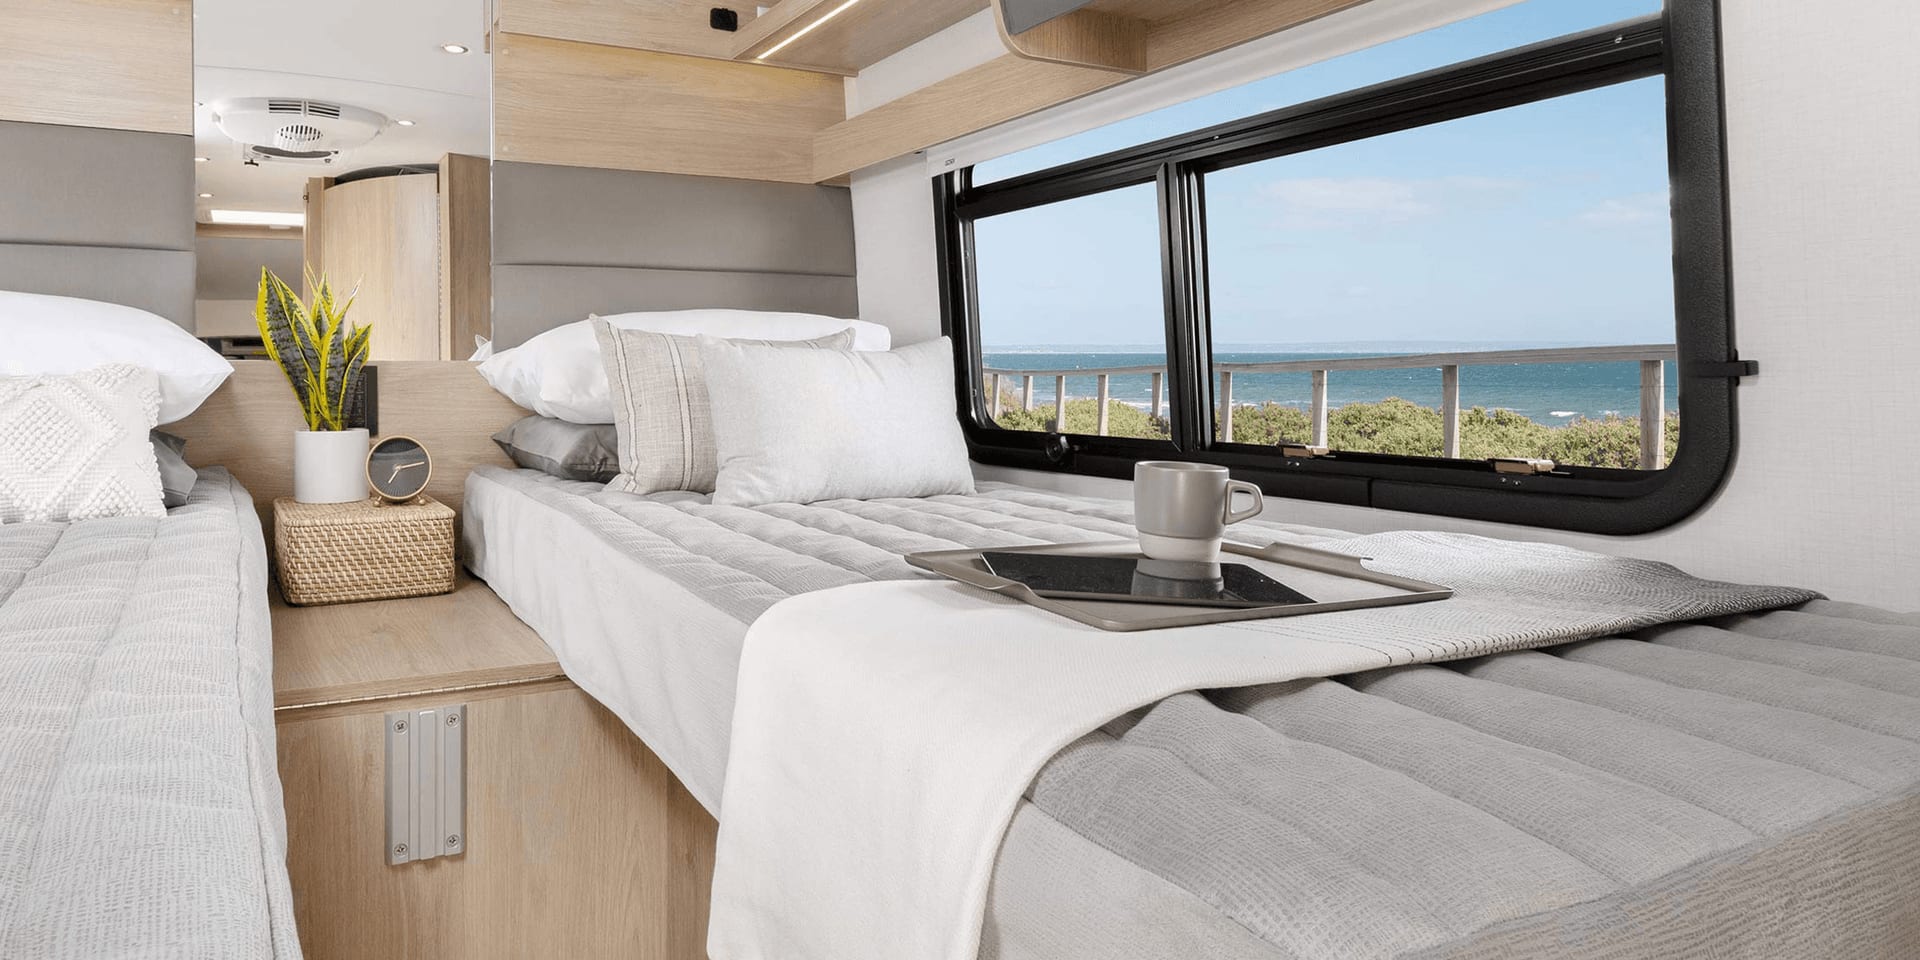 Inside view of an RV showing the made beds.